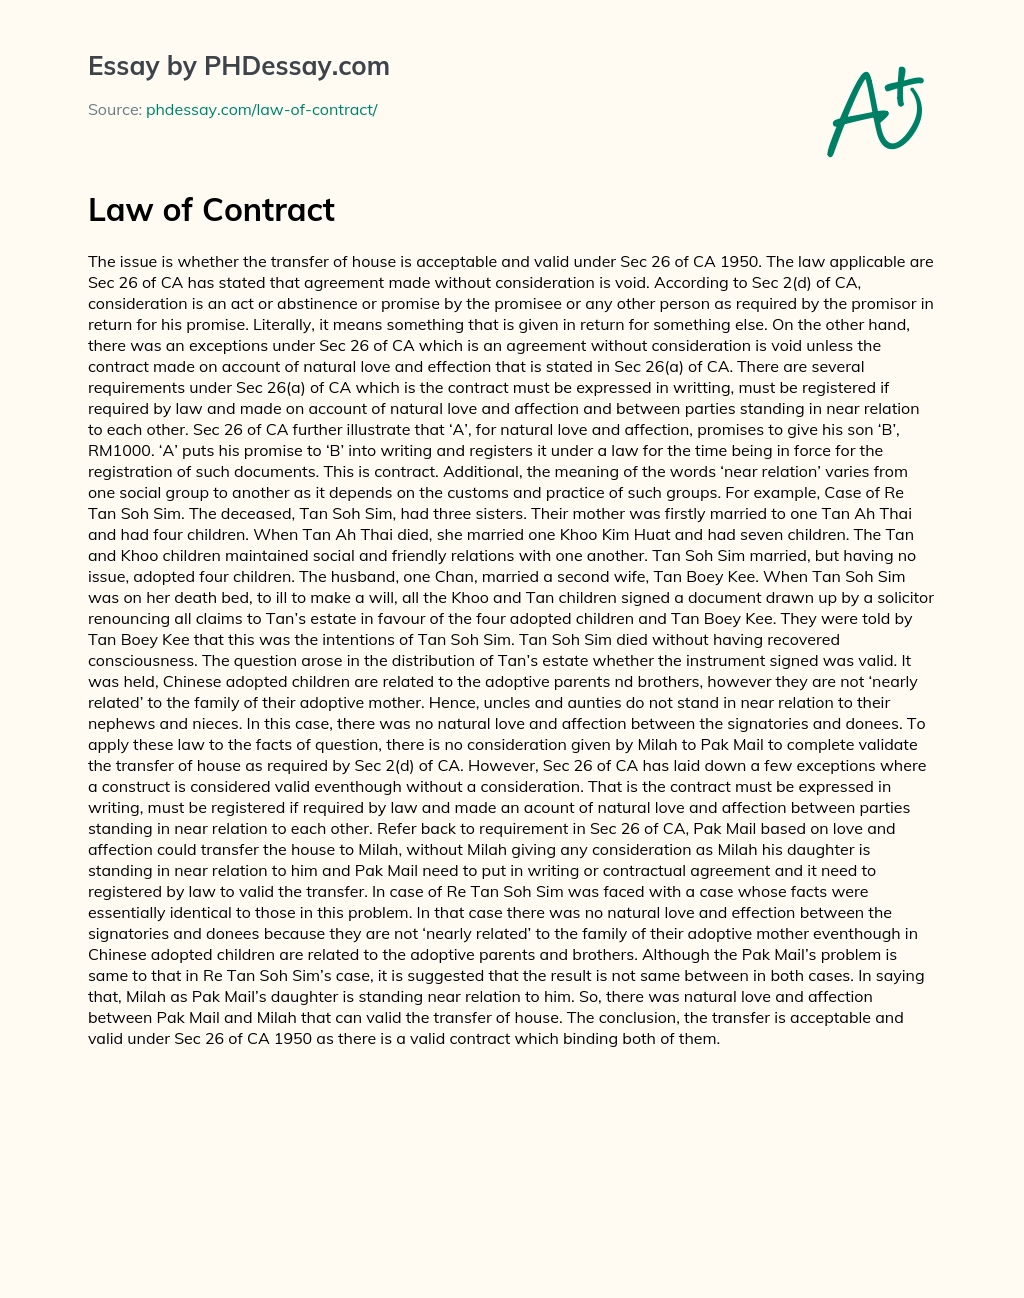 Law of Contract essay